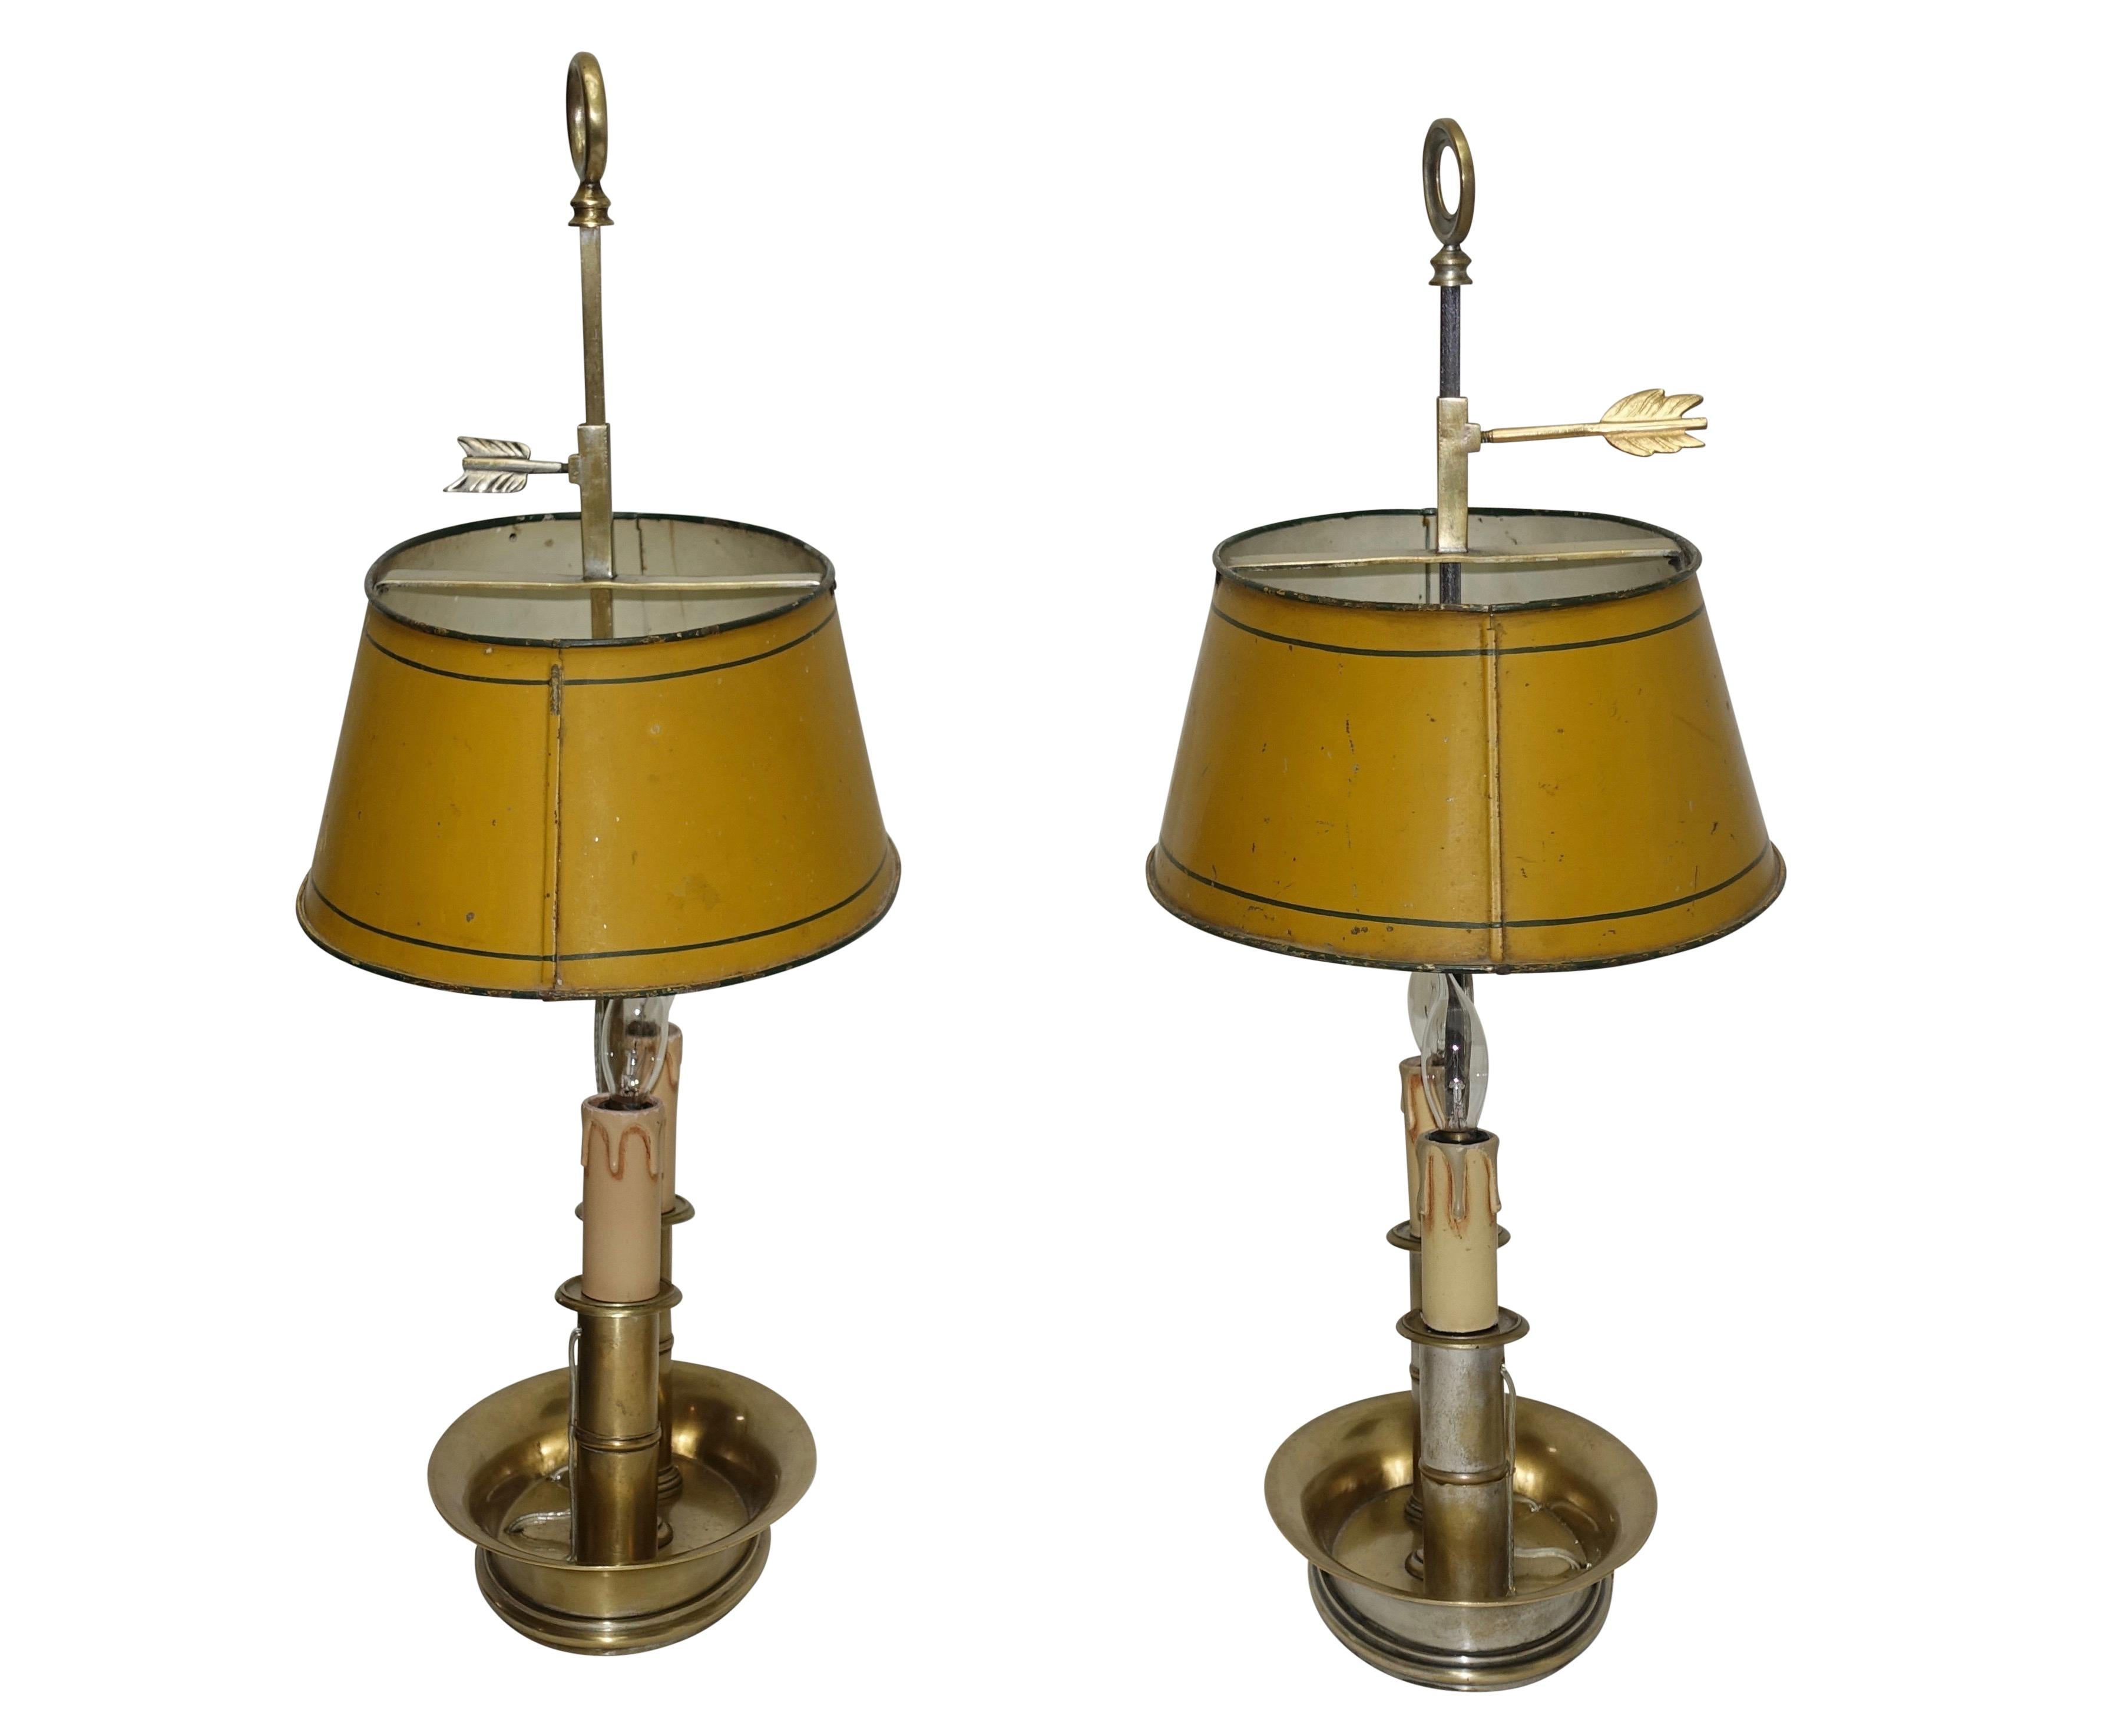 Pair of Brass Bouilotte Lamps with Yellow Tole Shades, French Early 19th Century 2